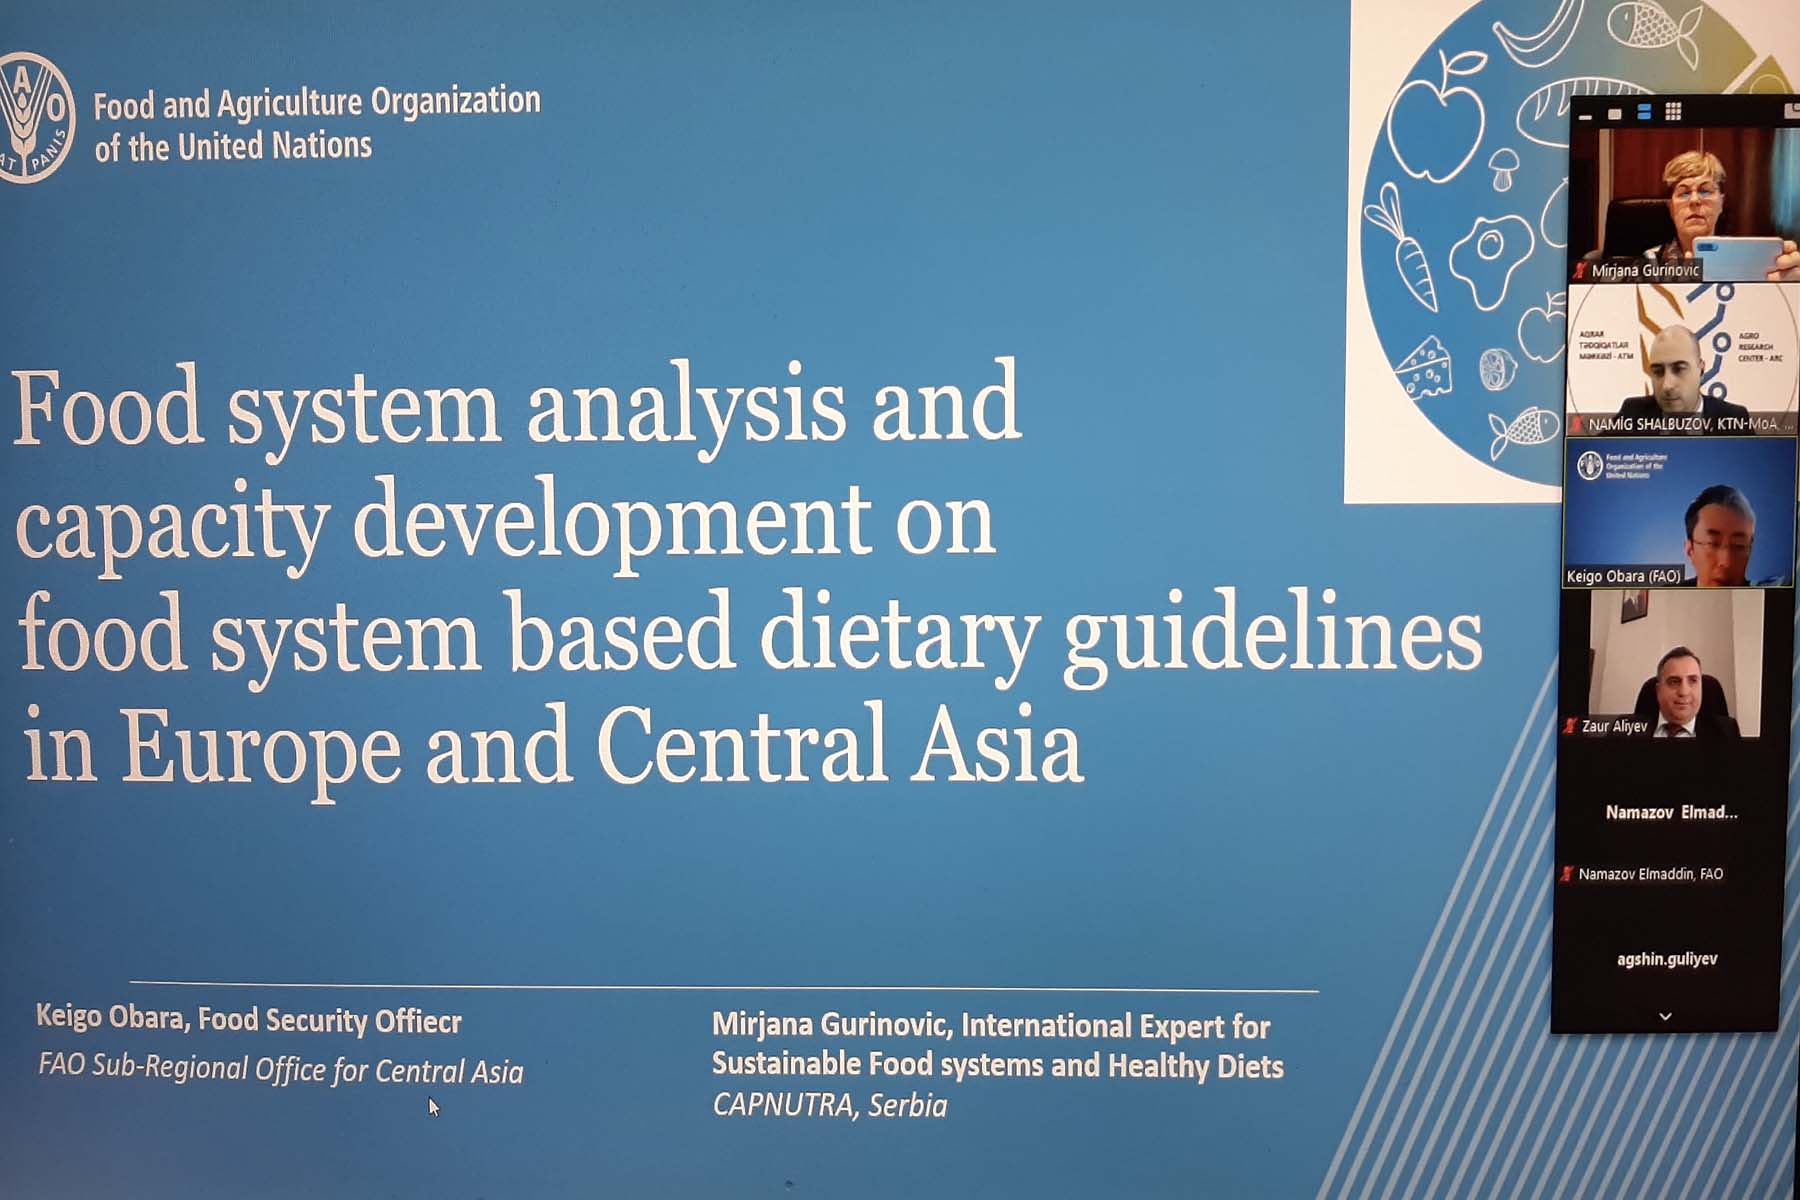 National Technical Meeting in Azerbaijan
Enhancing analytical evidence on diet and nutrition challenges from food systems perspectives 26th December 2023  Baku, Azerbaijan
Agenda